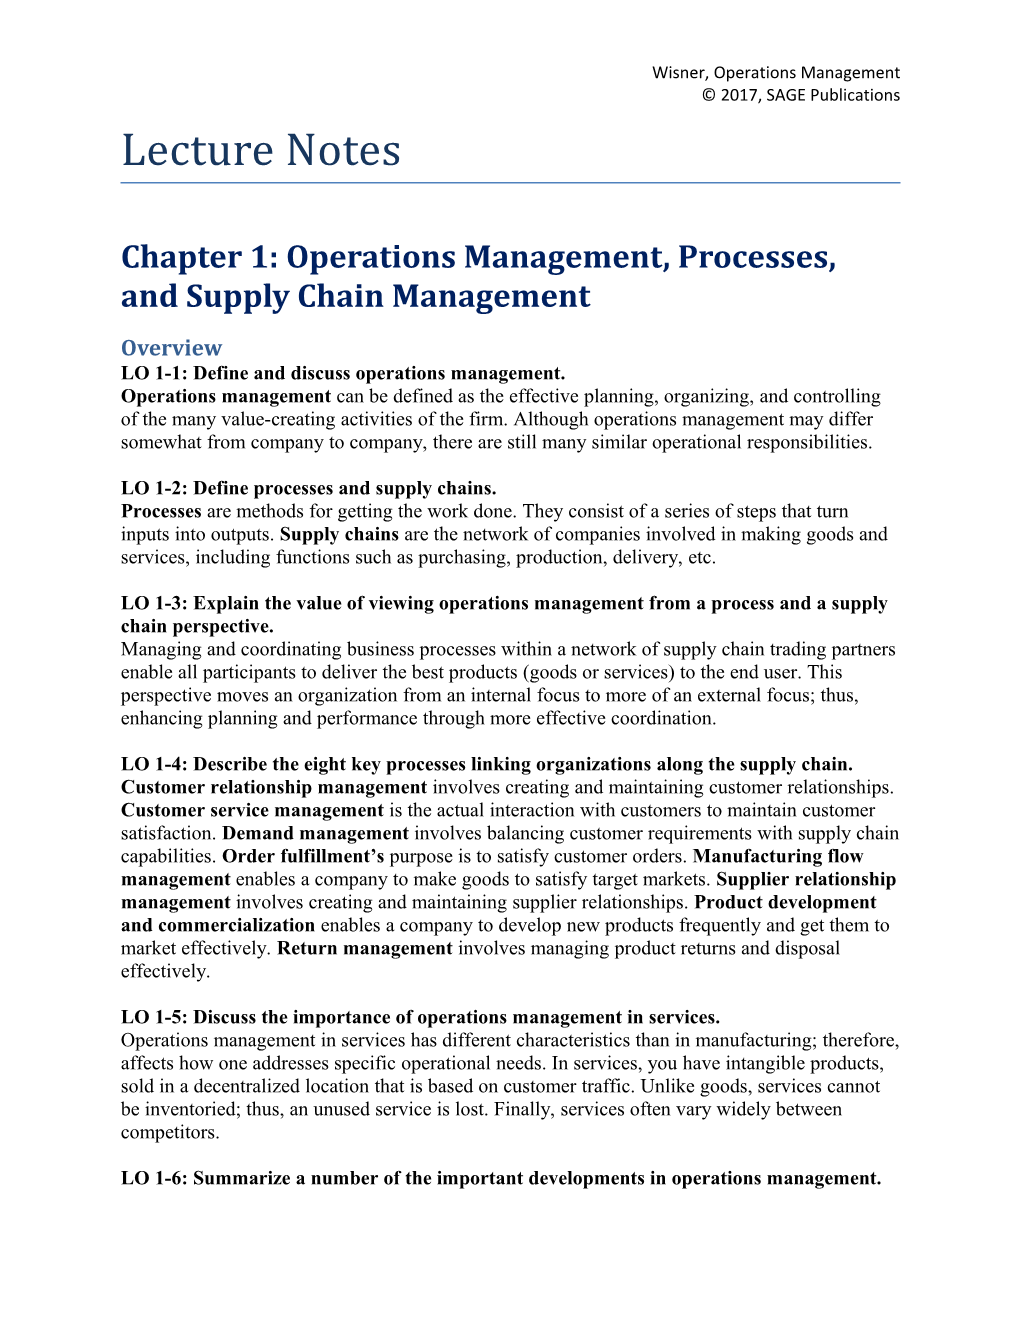 Chapter 1: Operations Management, Processes, and Supply Chain Management